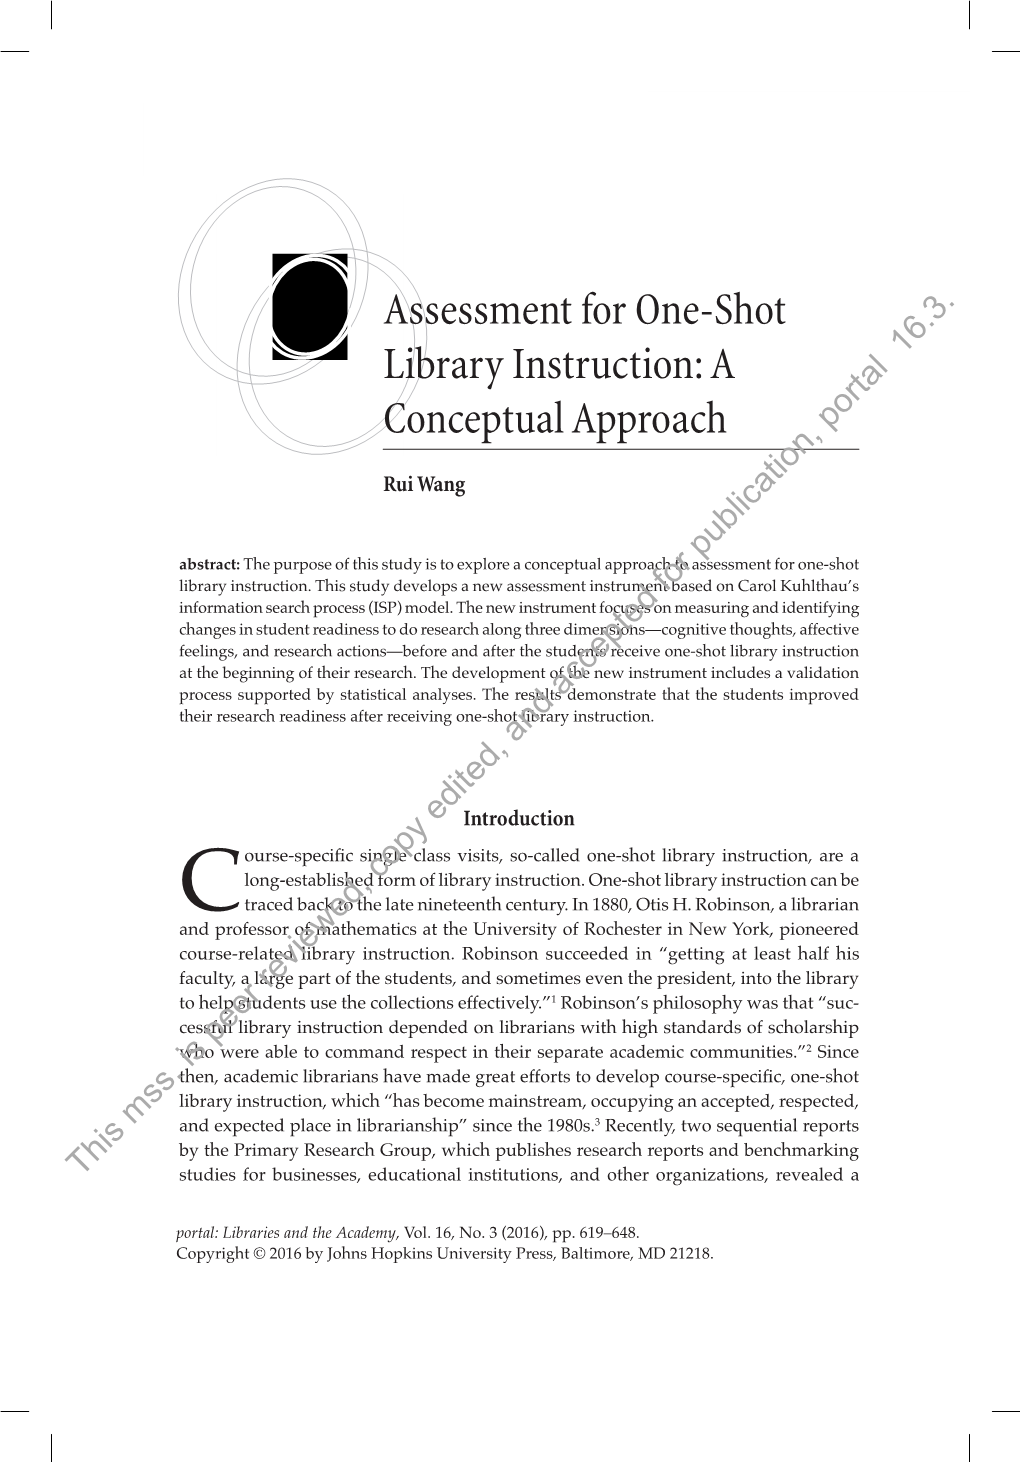 Assessment for One-Shot Library Instruction: a 16.3